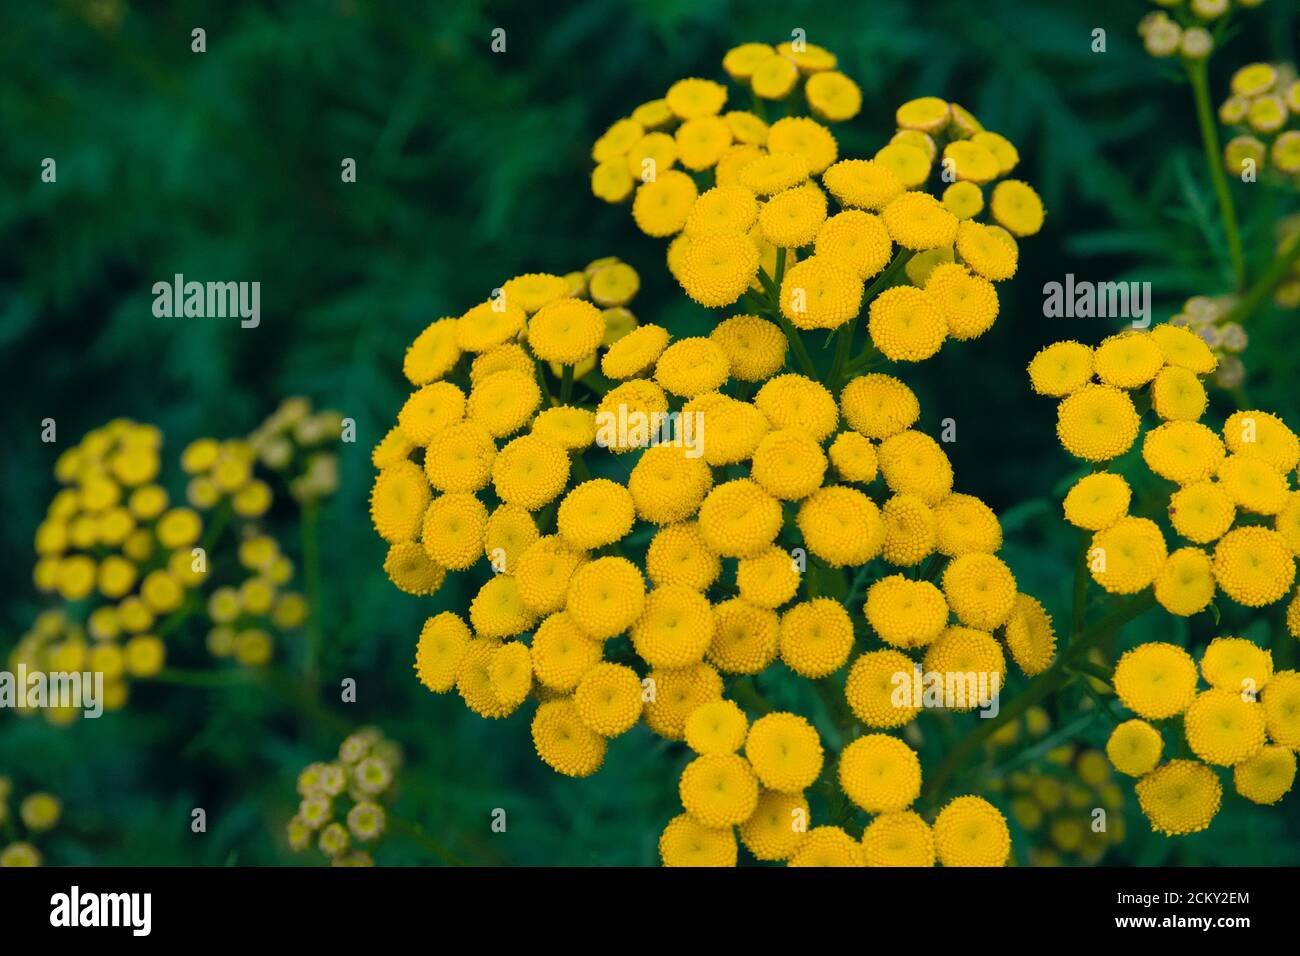 Yellow wild flower Tansy growing next to a corn field, scientific name Tanacetum vulgare Stock Photo